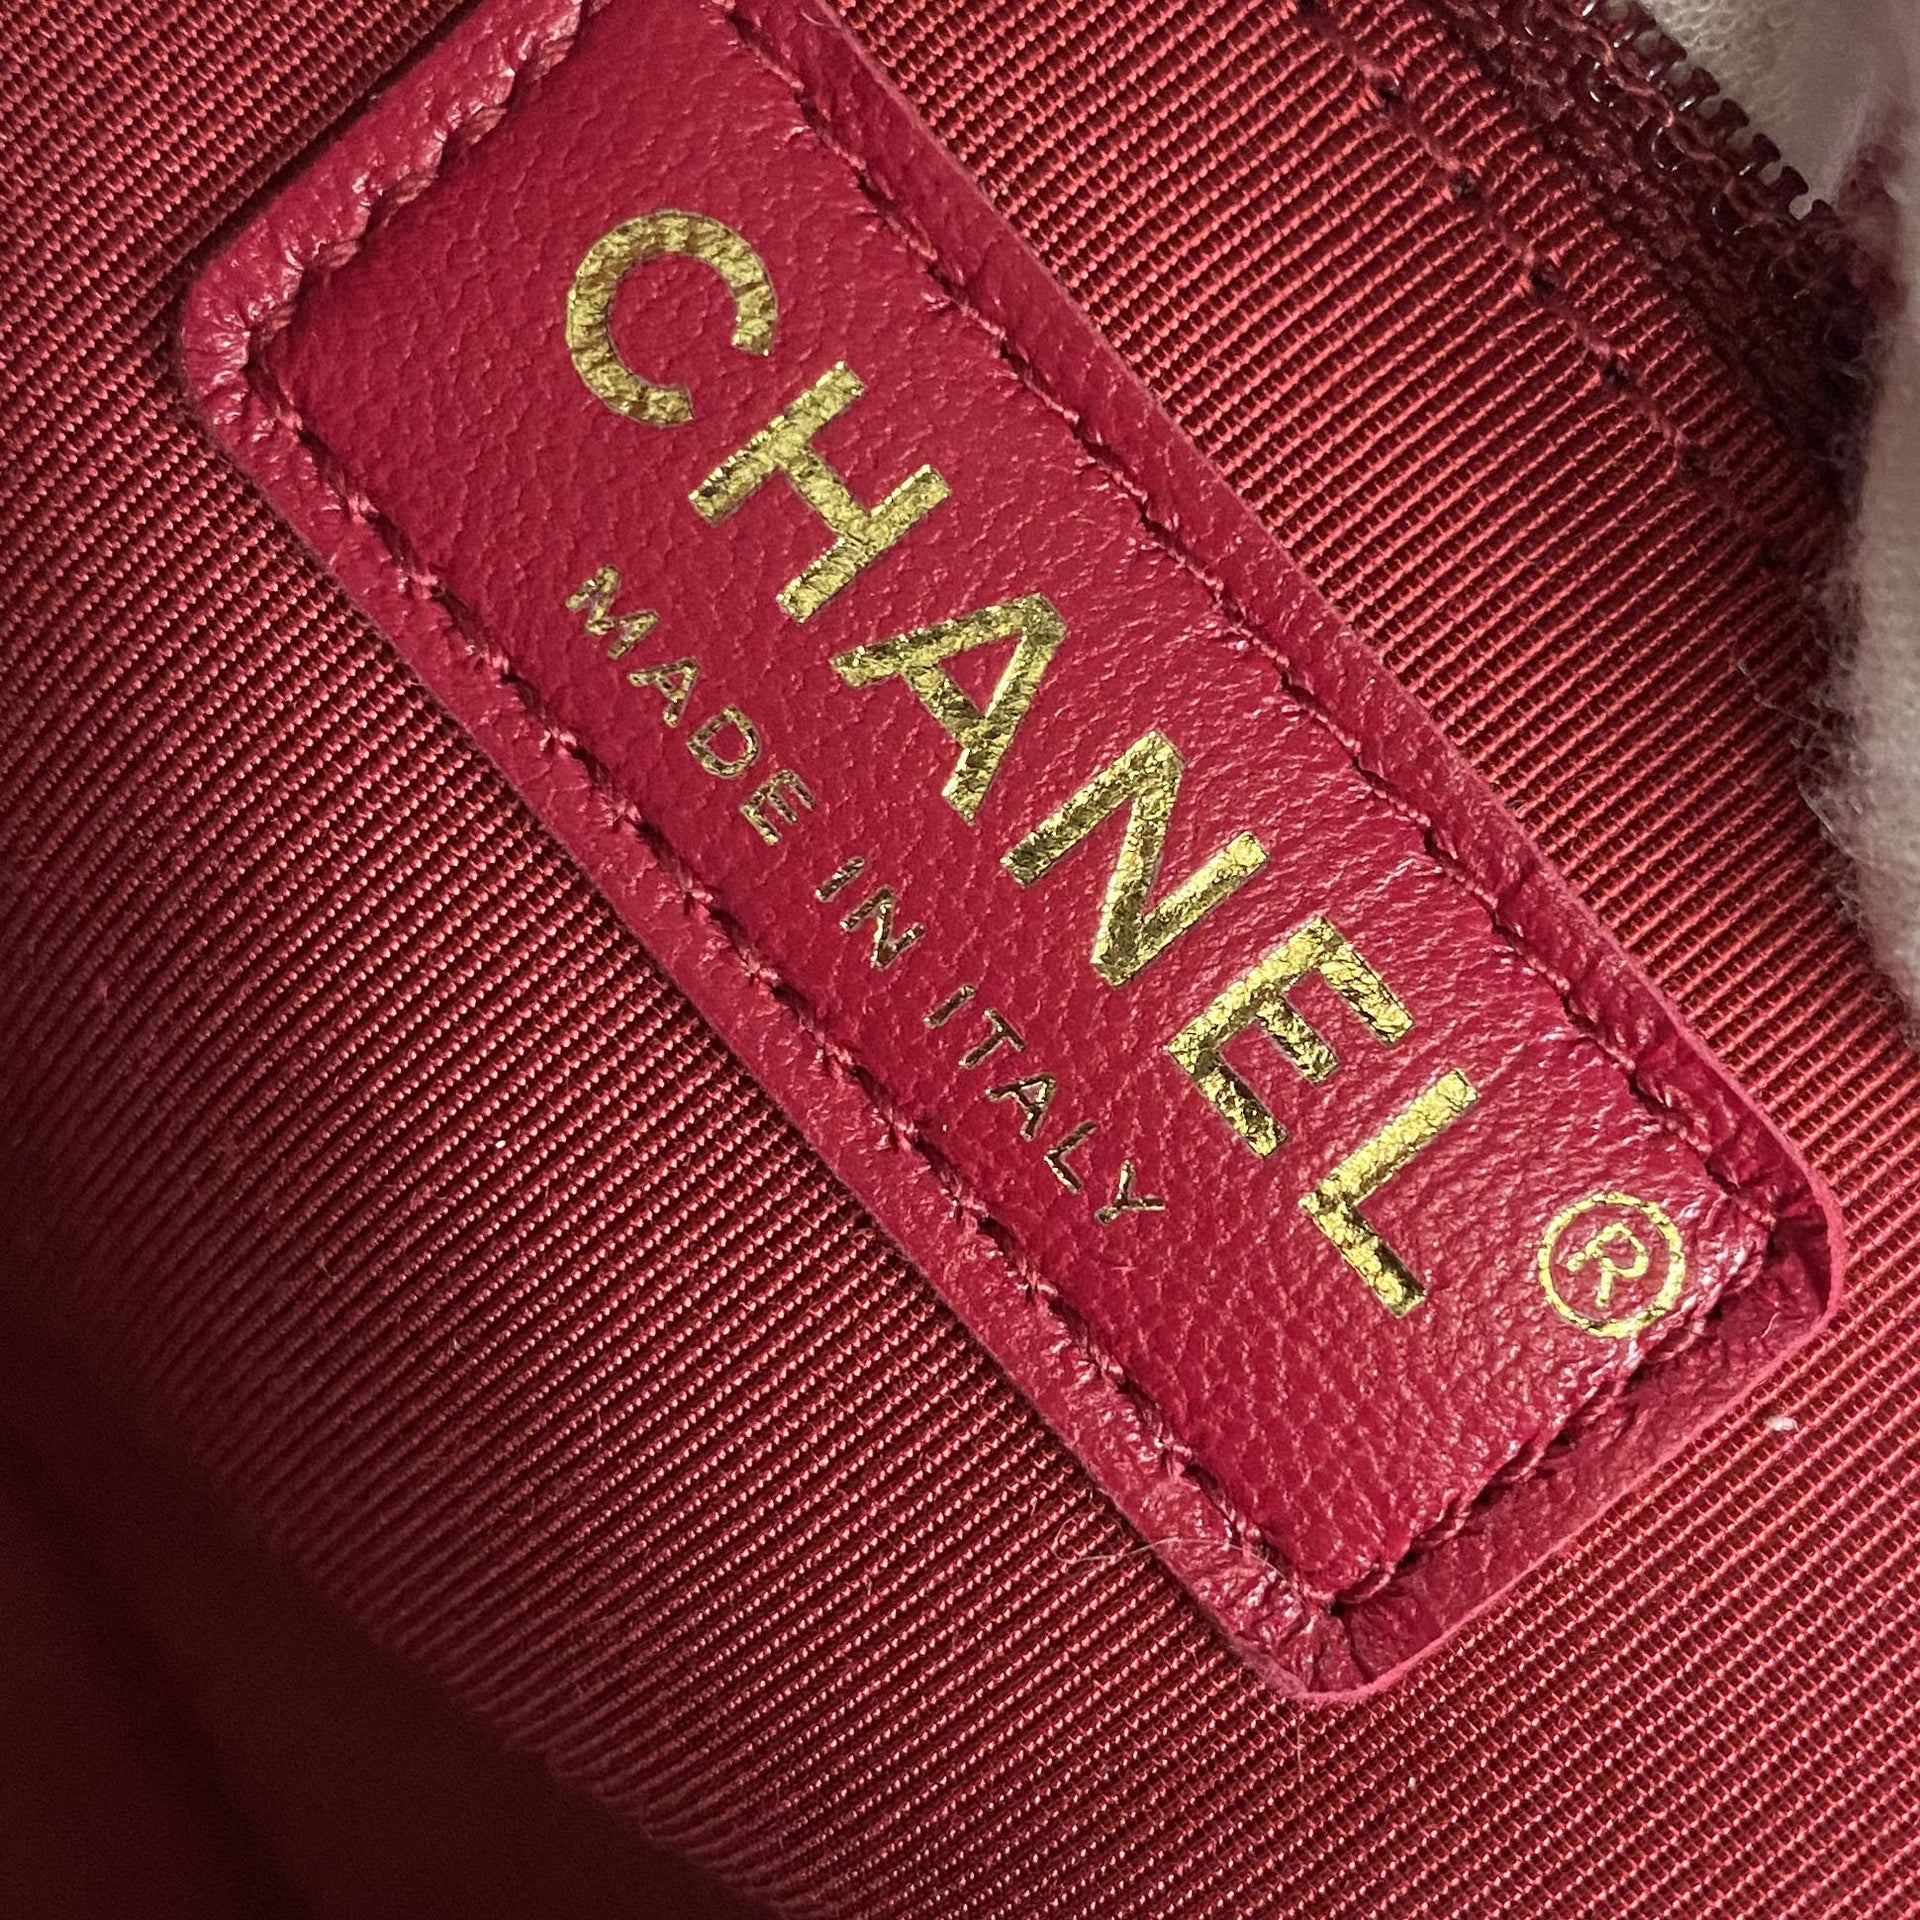 how do you tell if a chanel bag is real